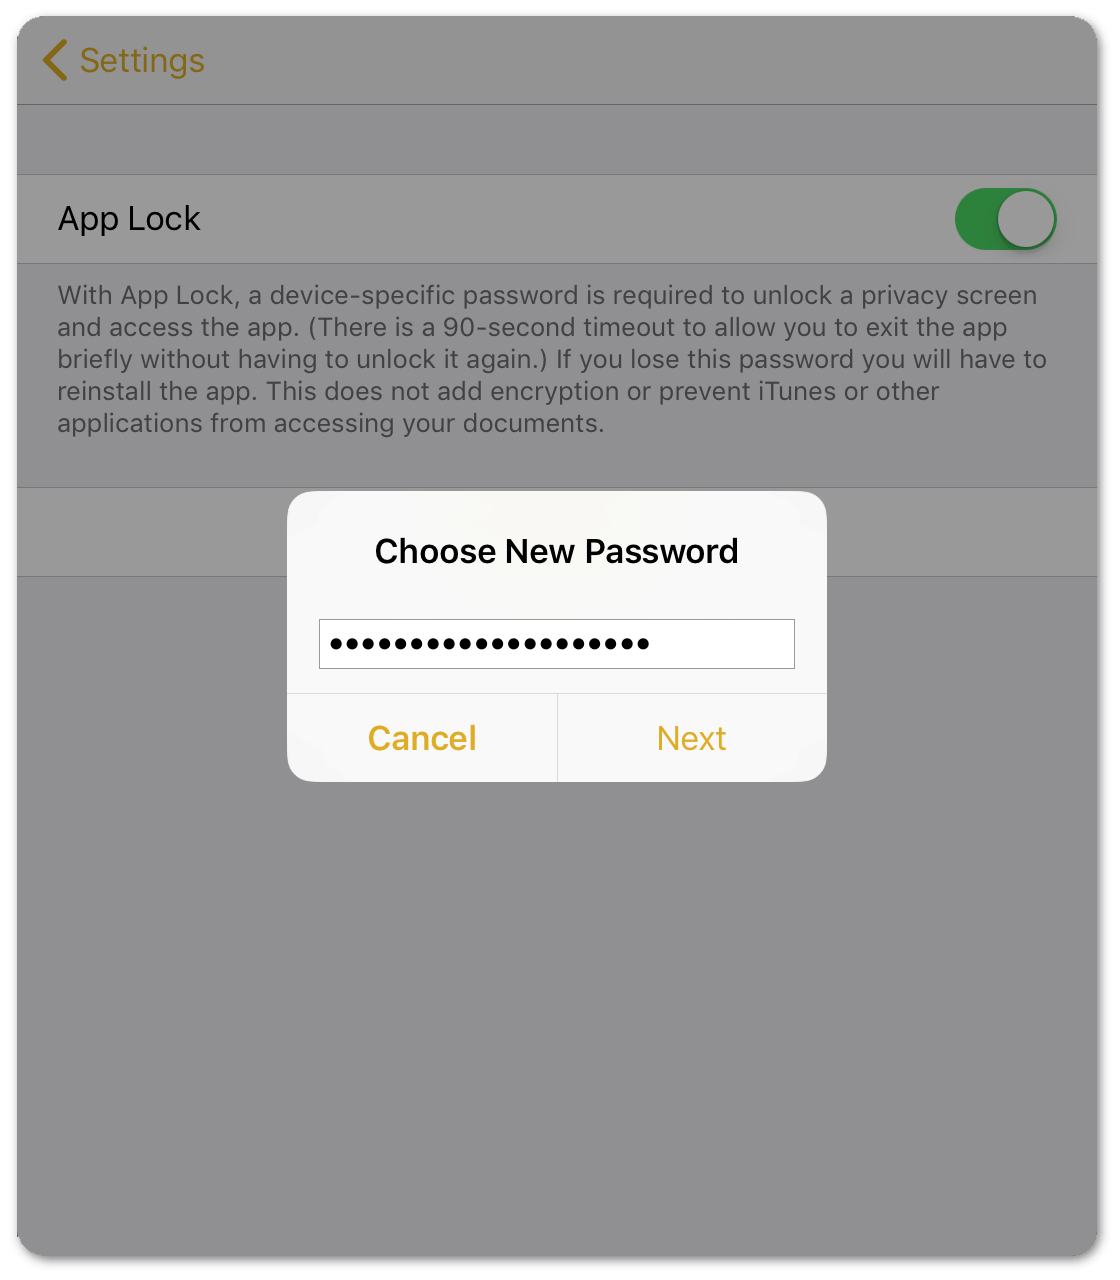 You are prompted to choose a new password when setting up App Lock for the first time.